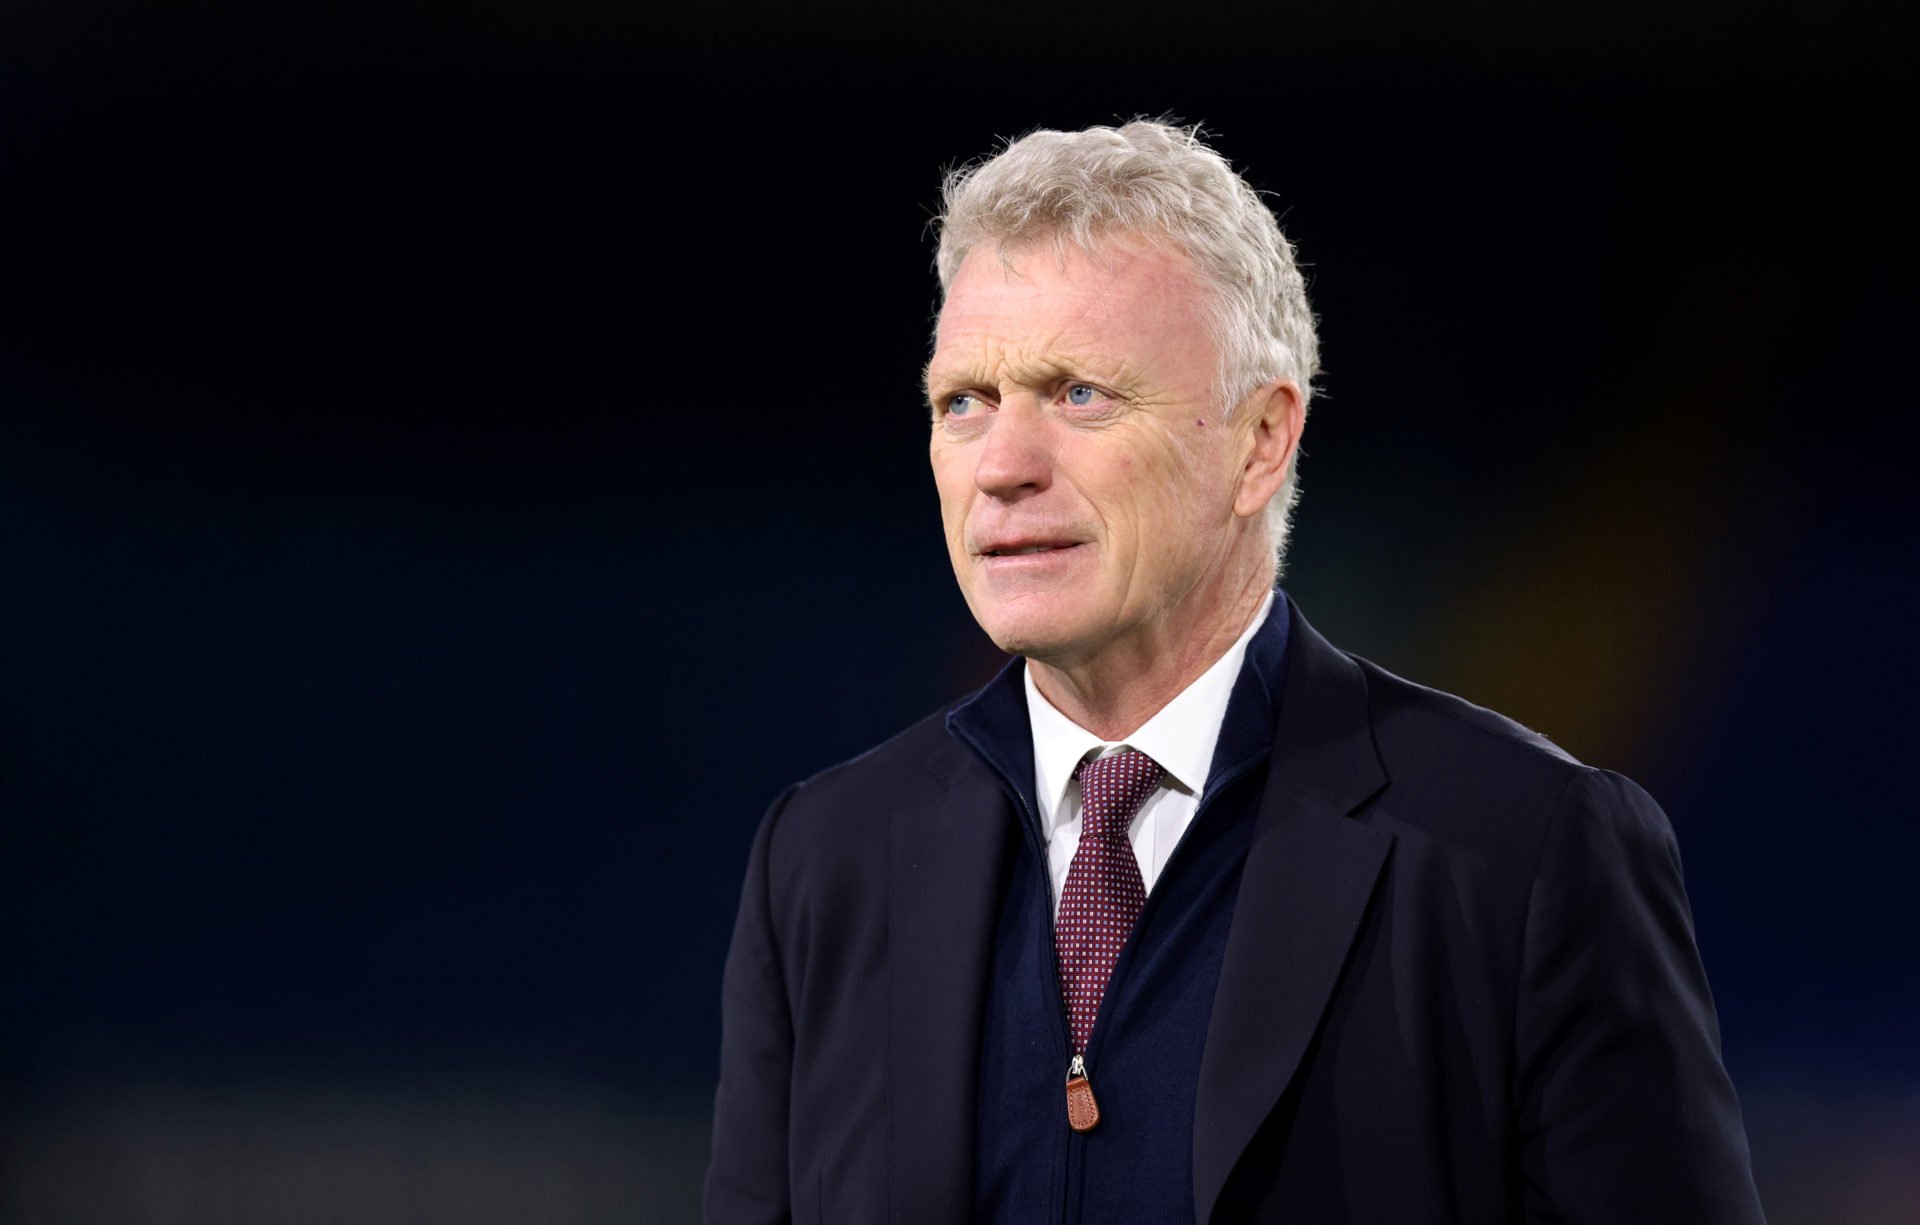 Moyes: I’m not worried about losing my job but pride keeps me going